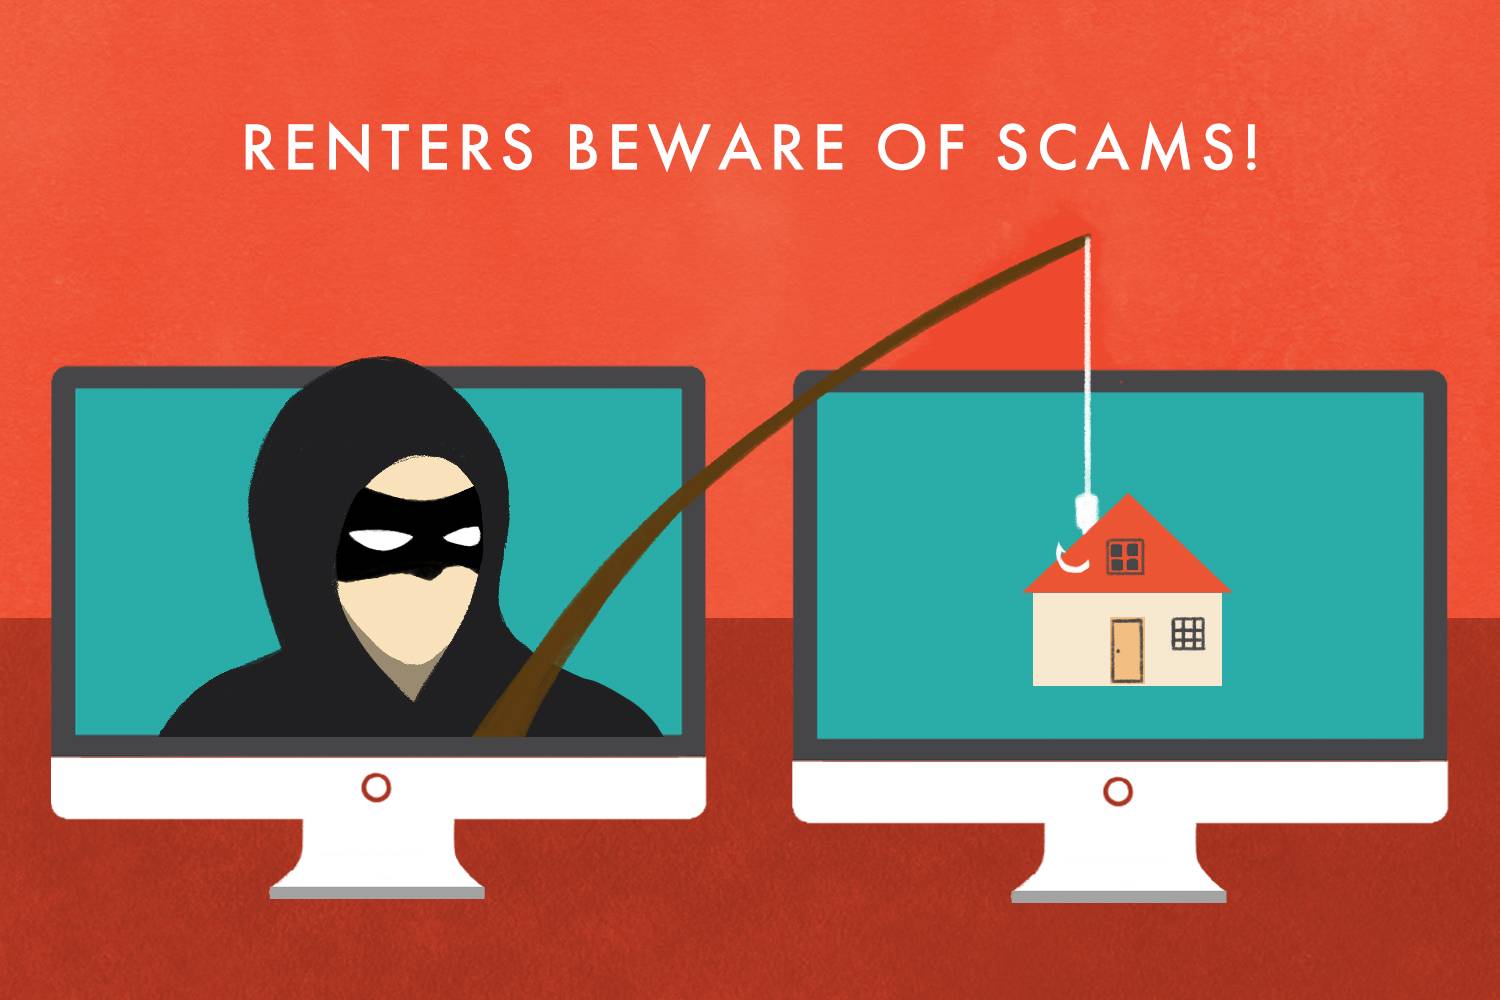  Rental Scams: Important Tips for Online Safety